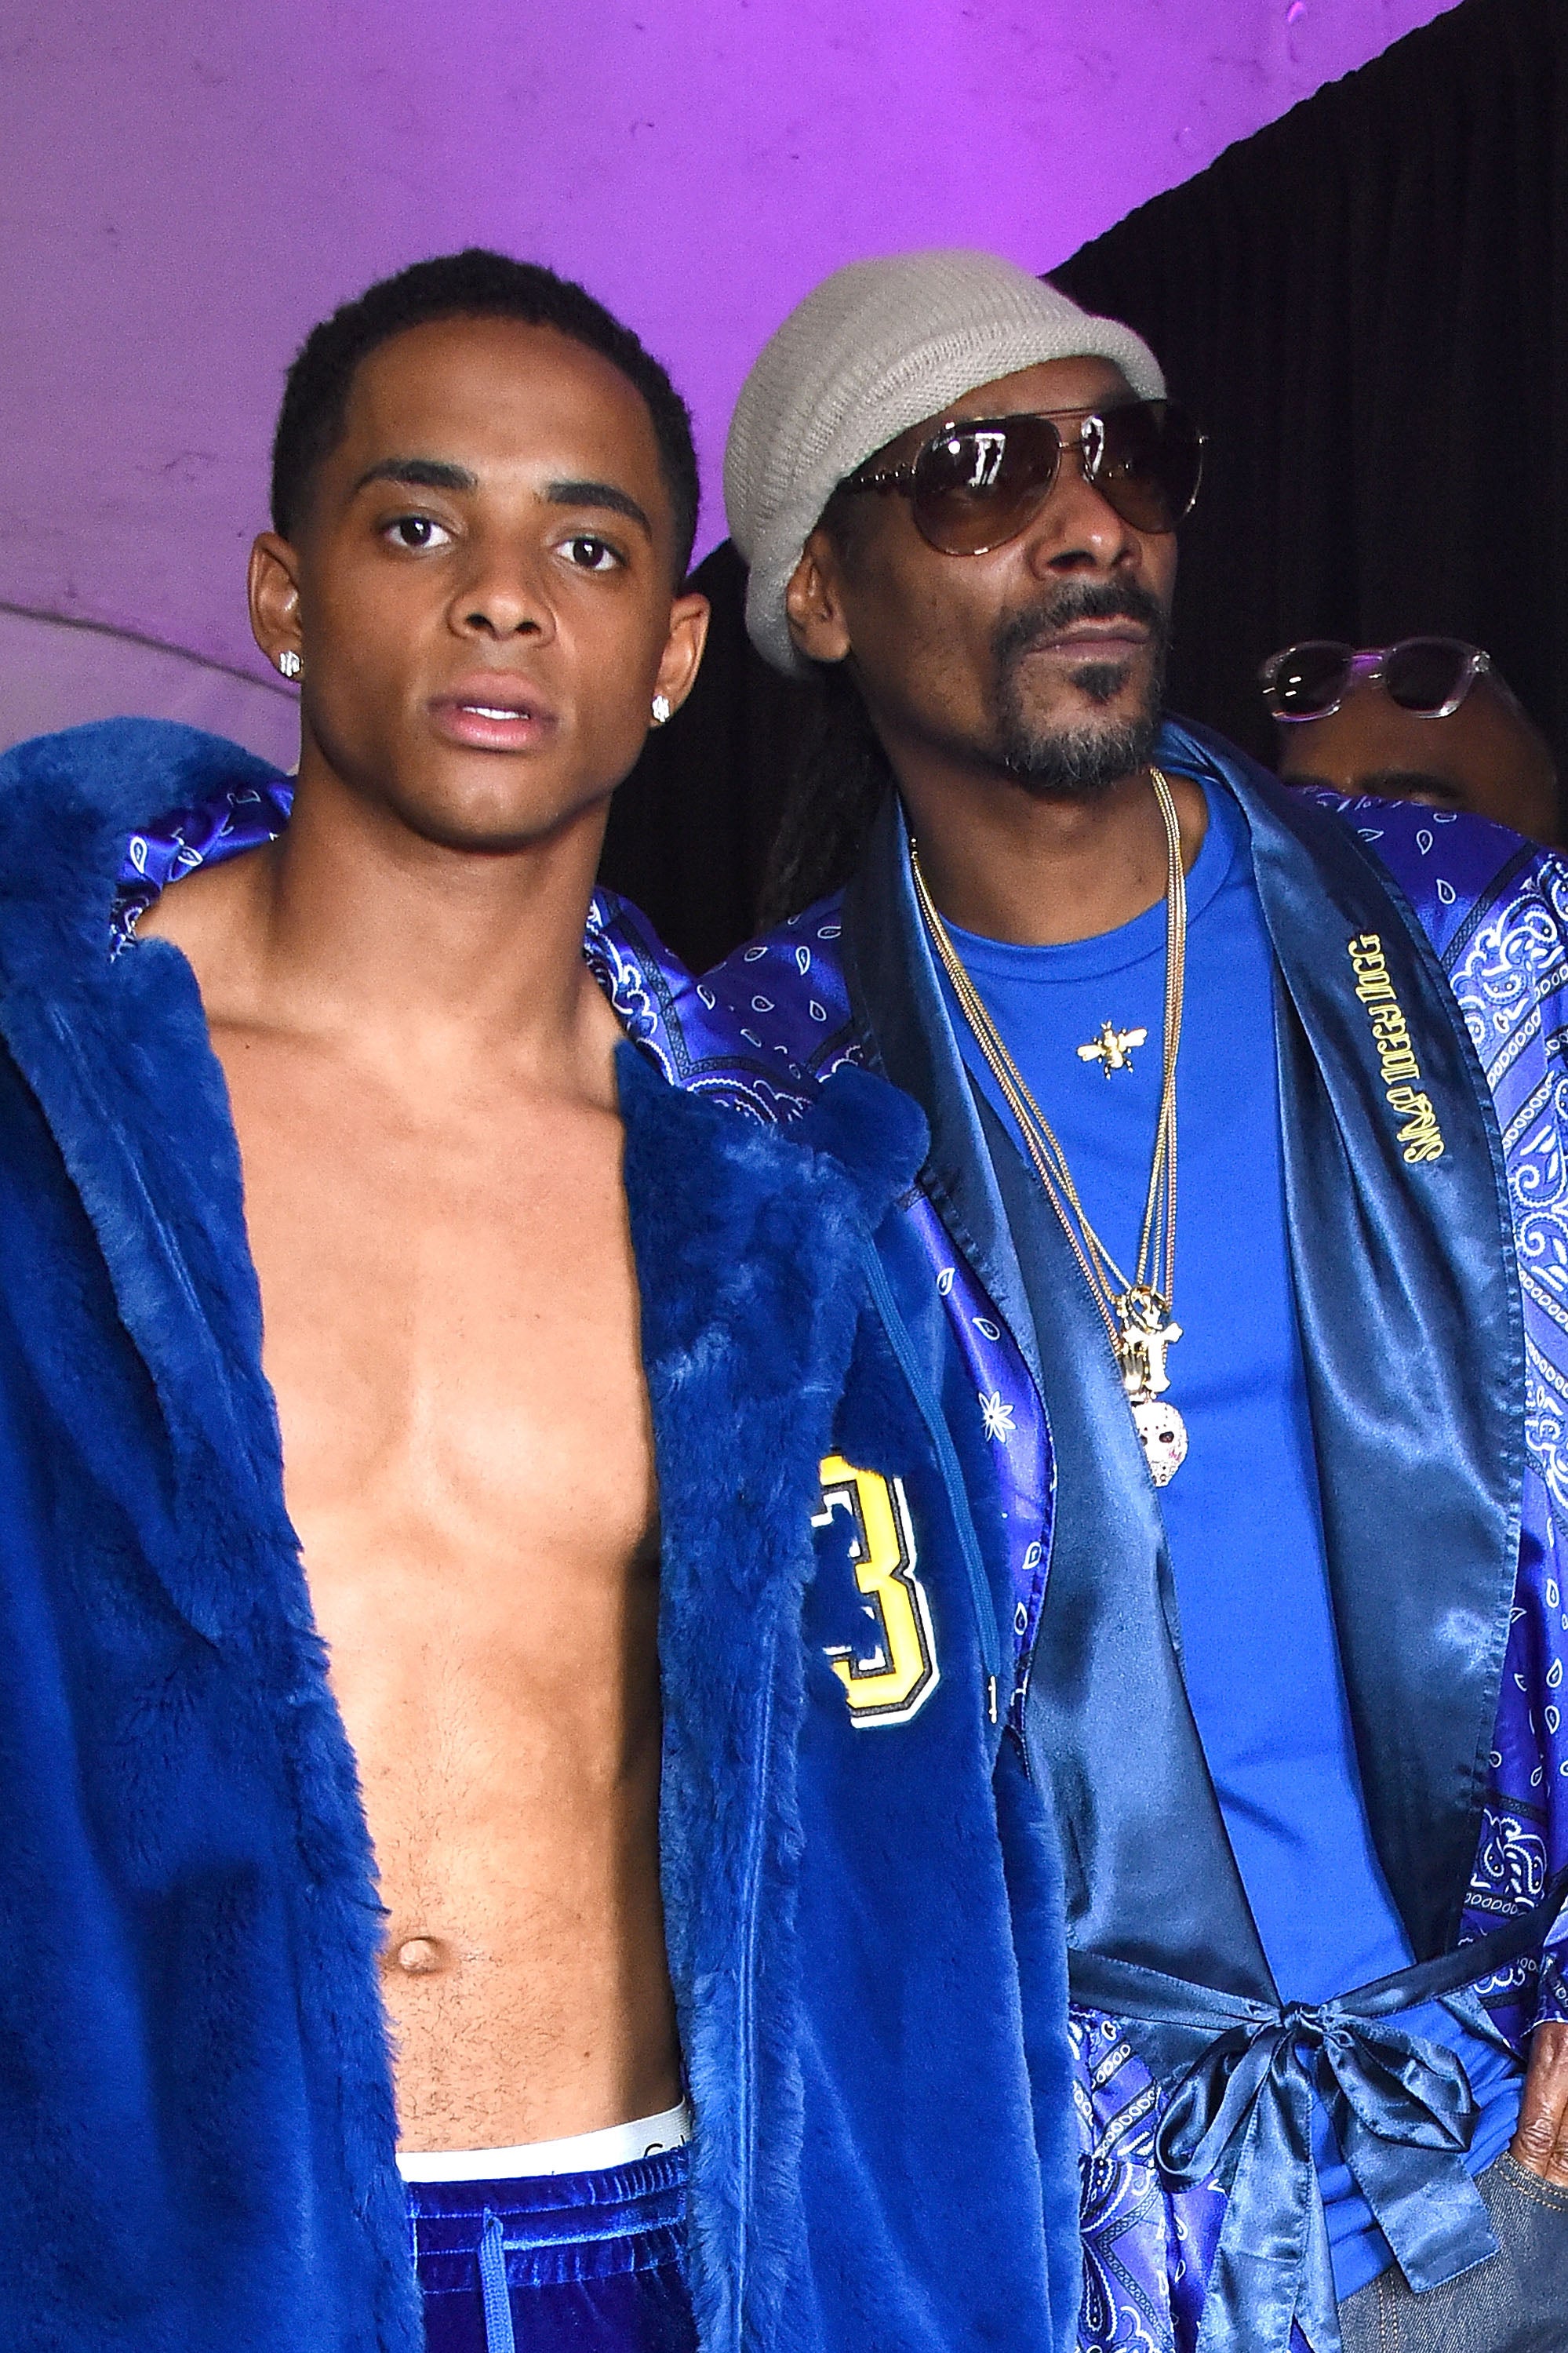 ICYMI: Snoop Dogg and Son Cordell Present Fashion Show During MADE LA and It's So California
